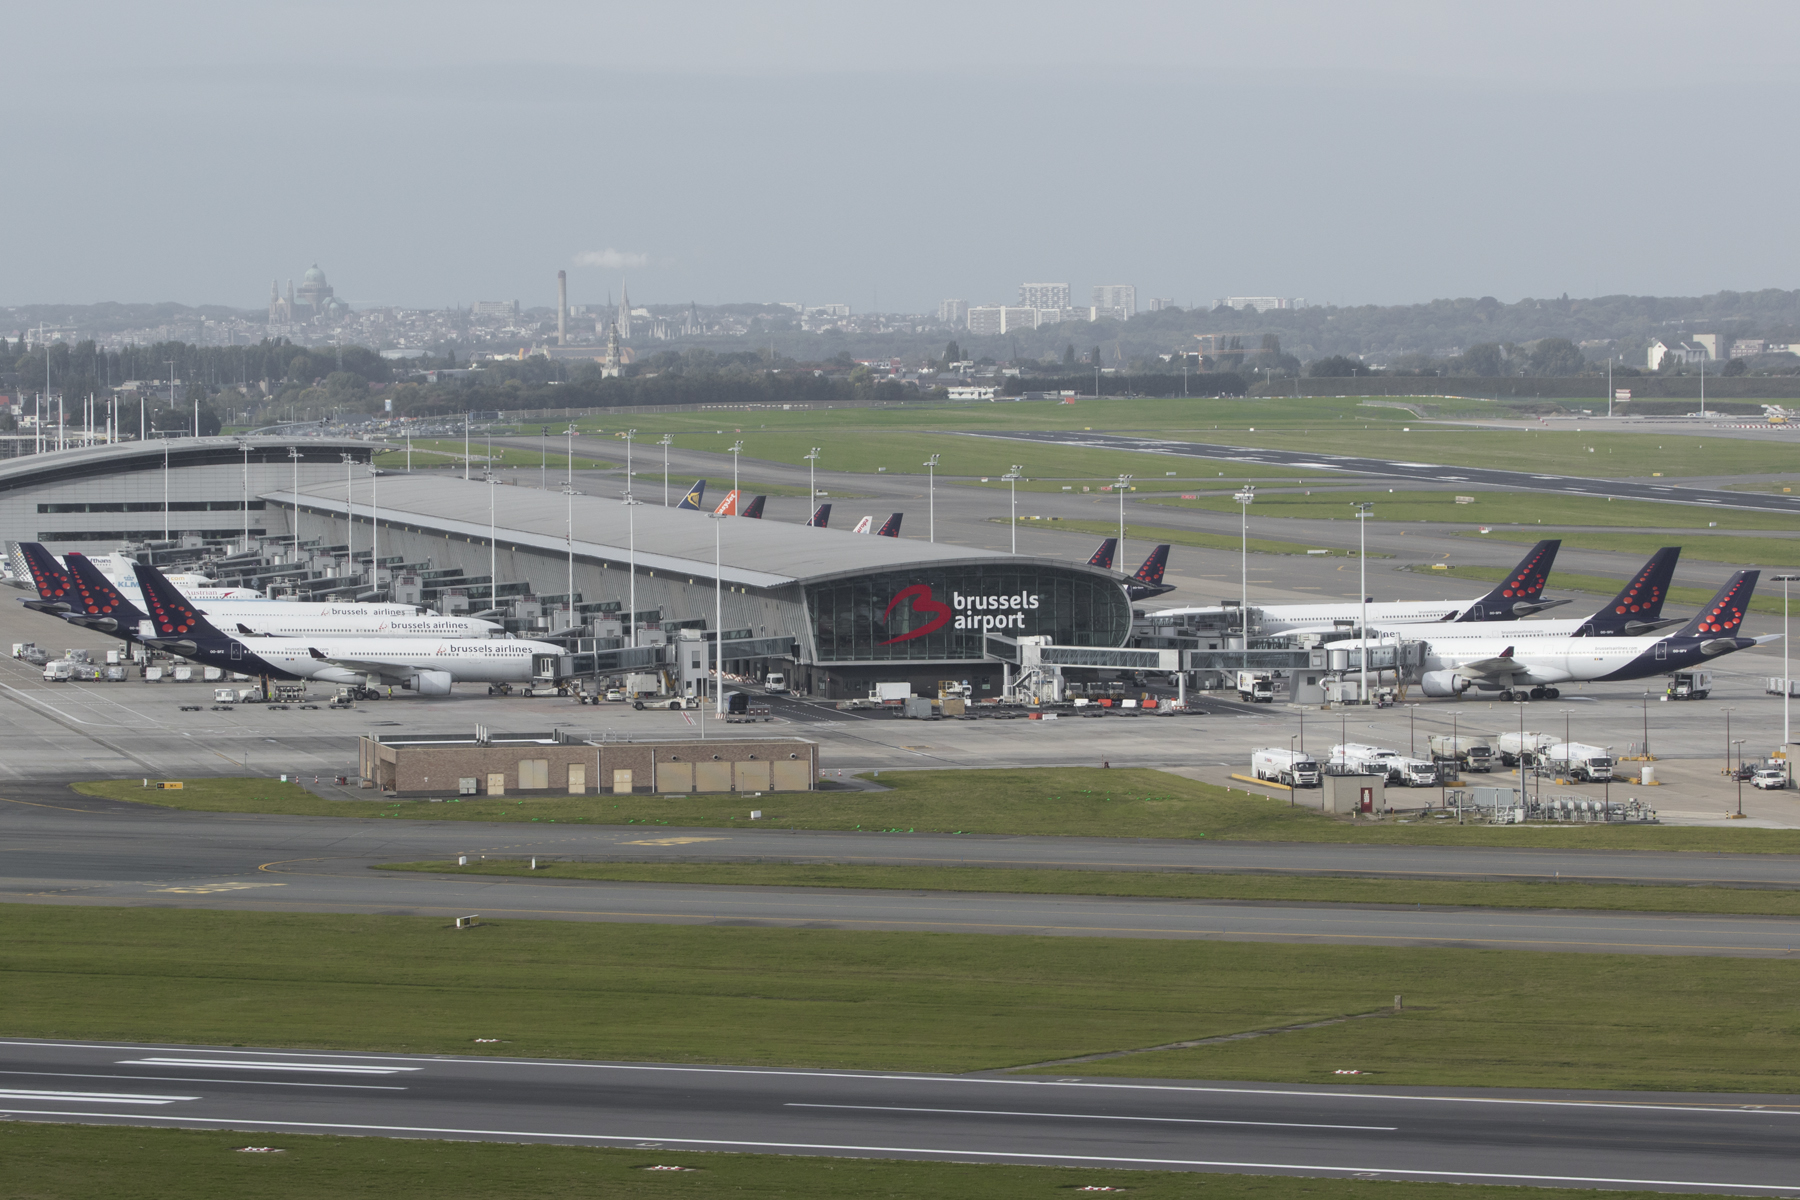 March traffic report: Brussels Airport sees rise in passengers despite challenges